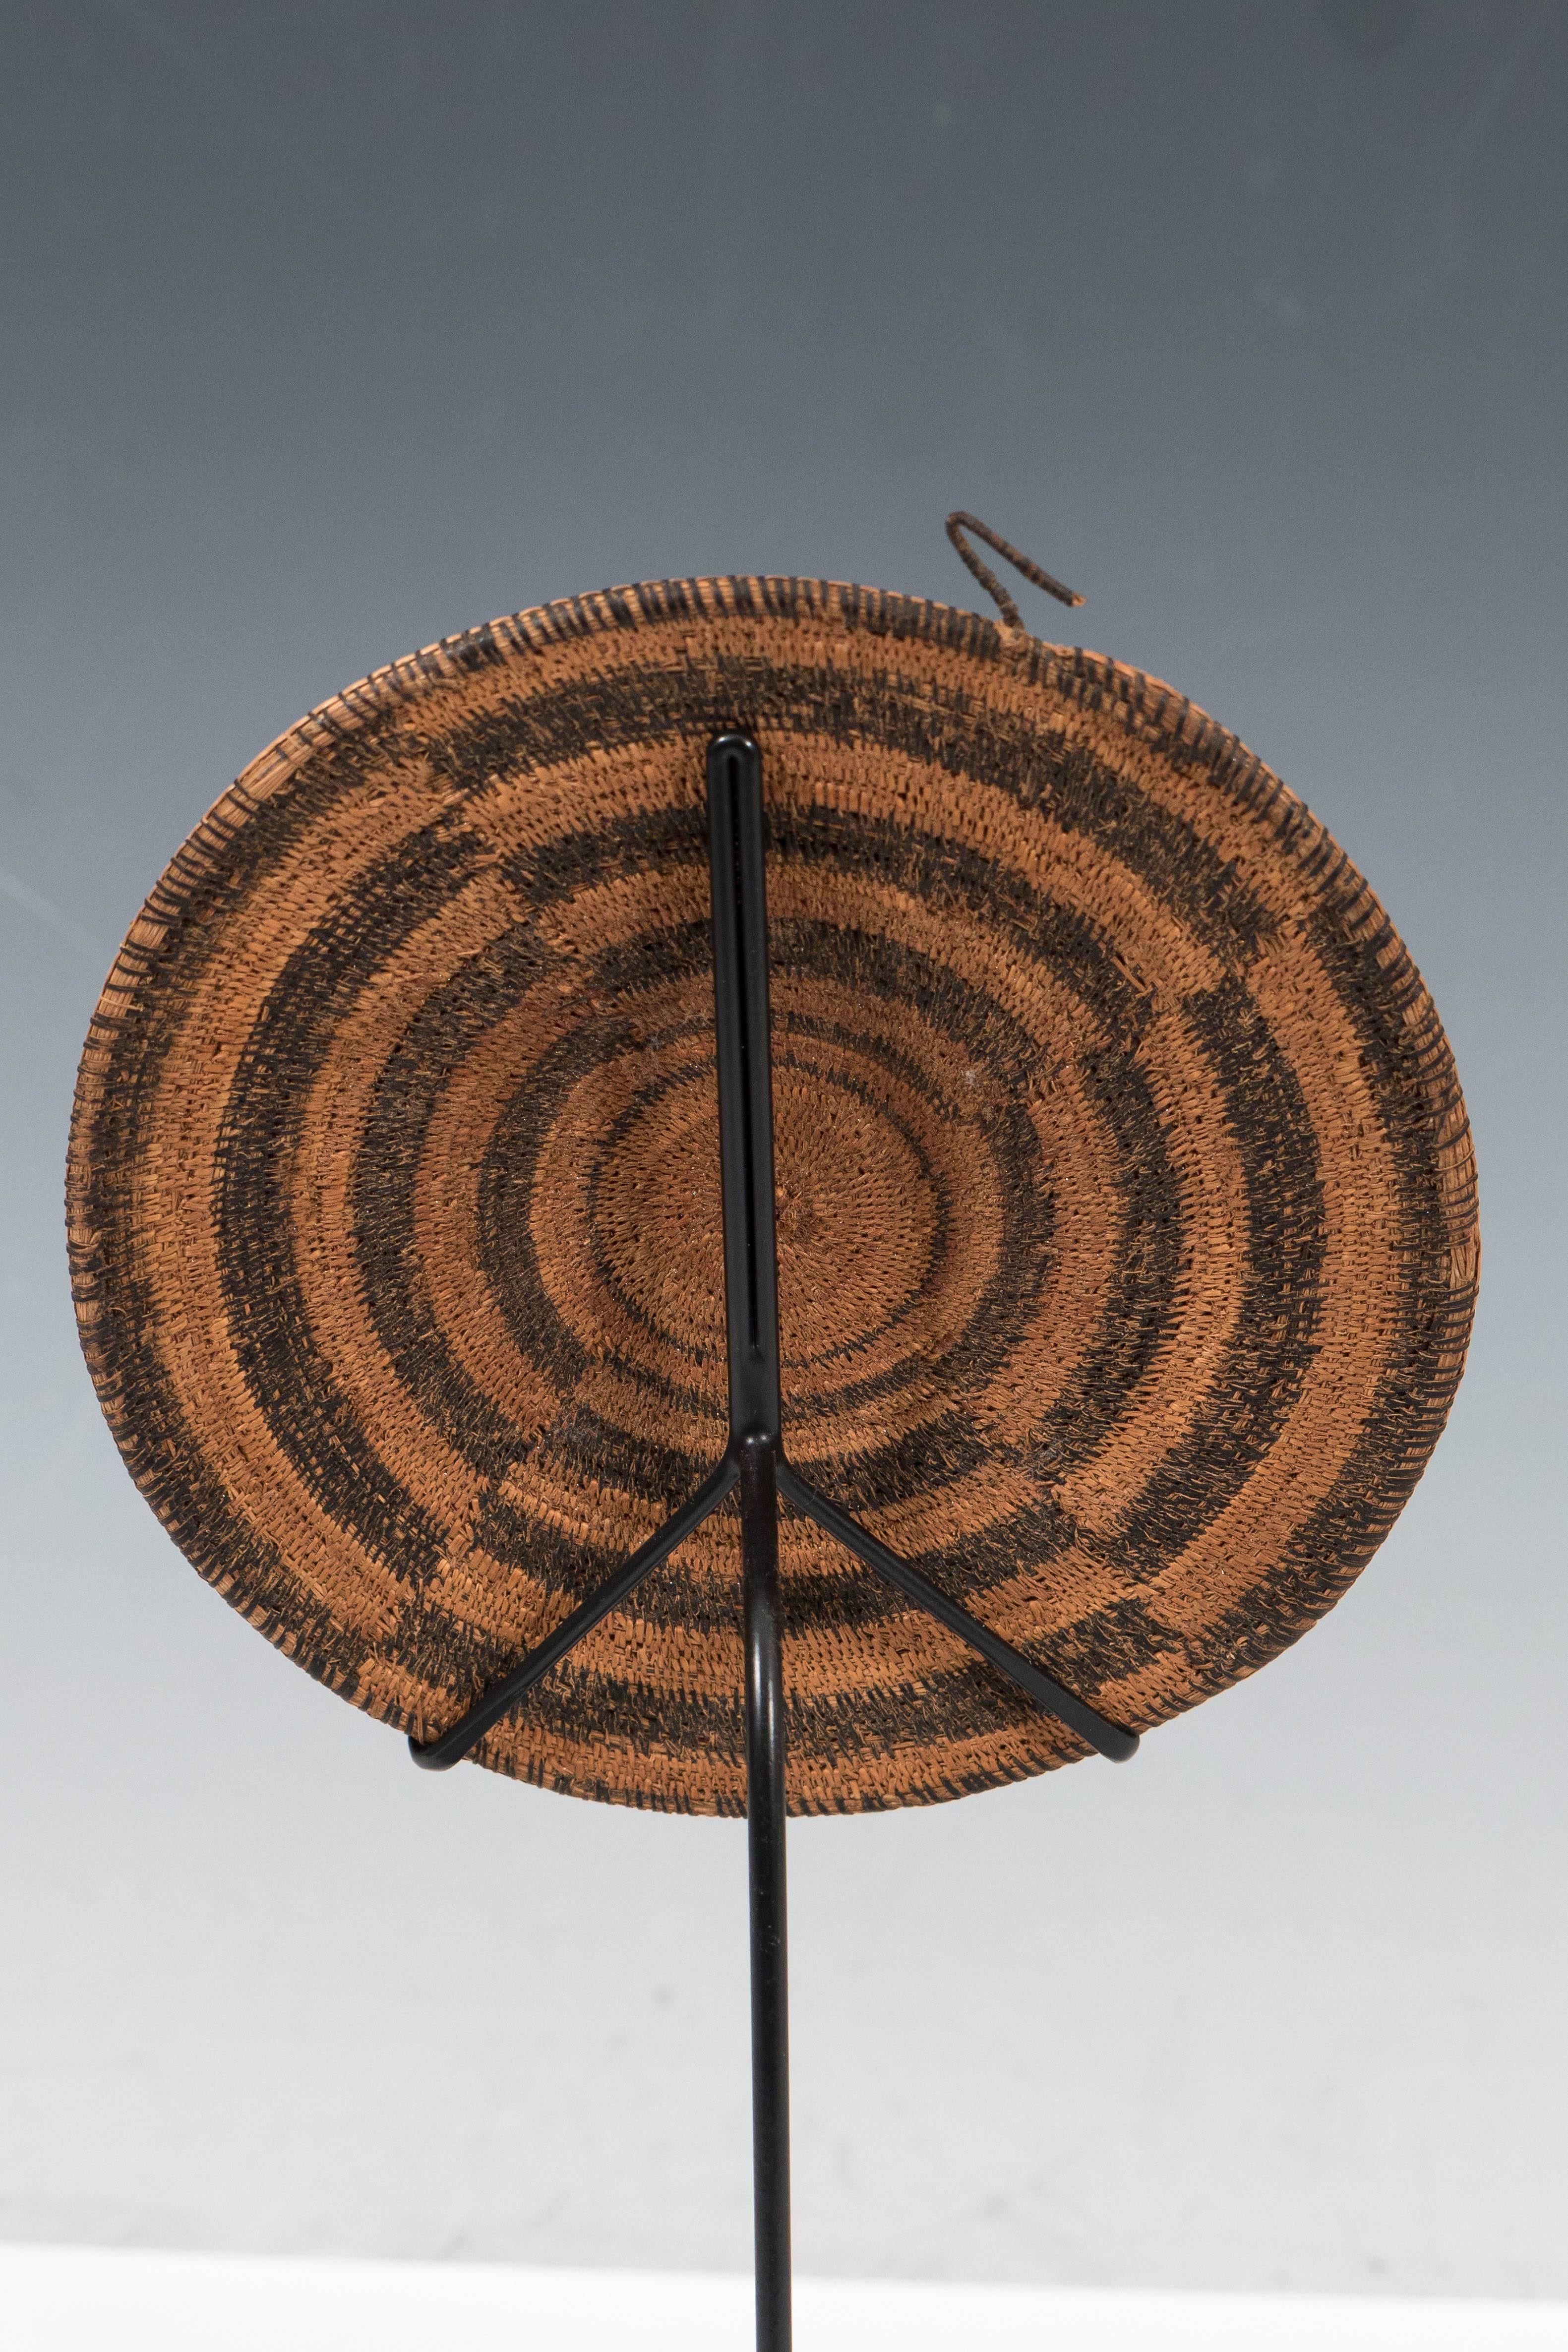 Woven Rattan Disc on Metal Stand 2